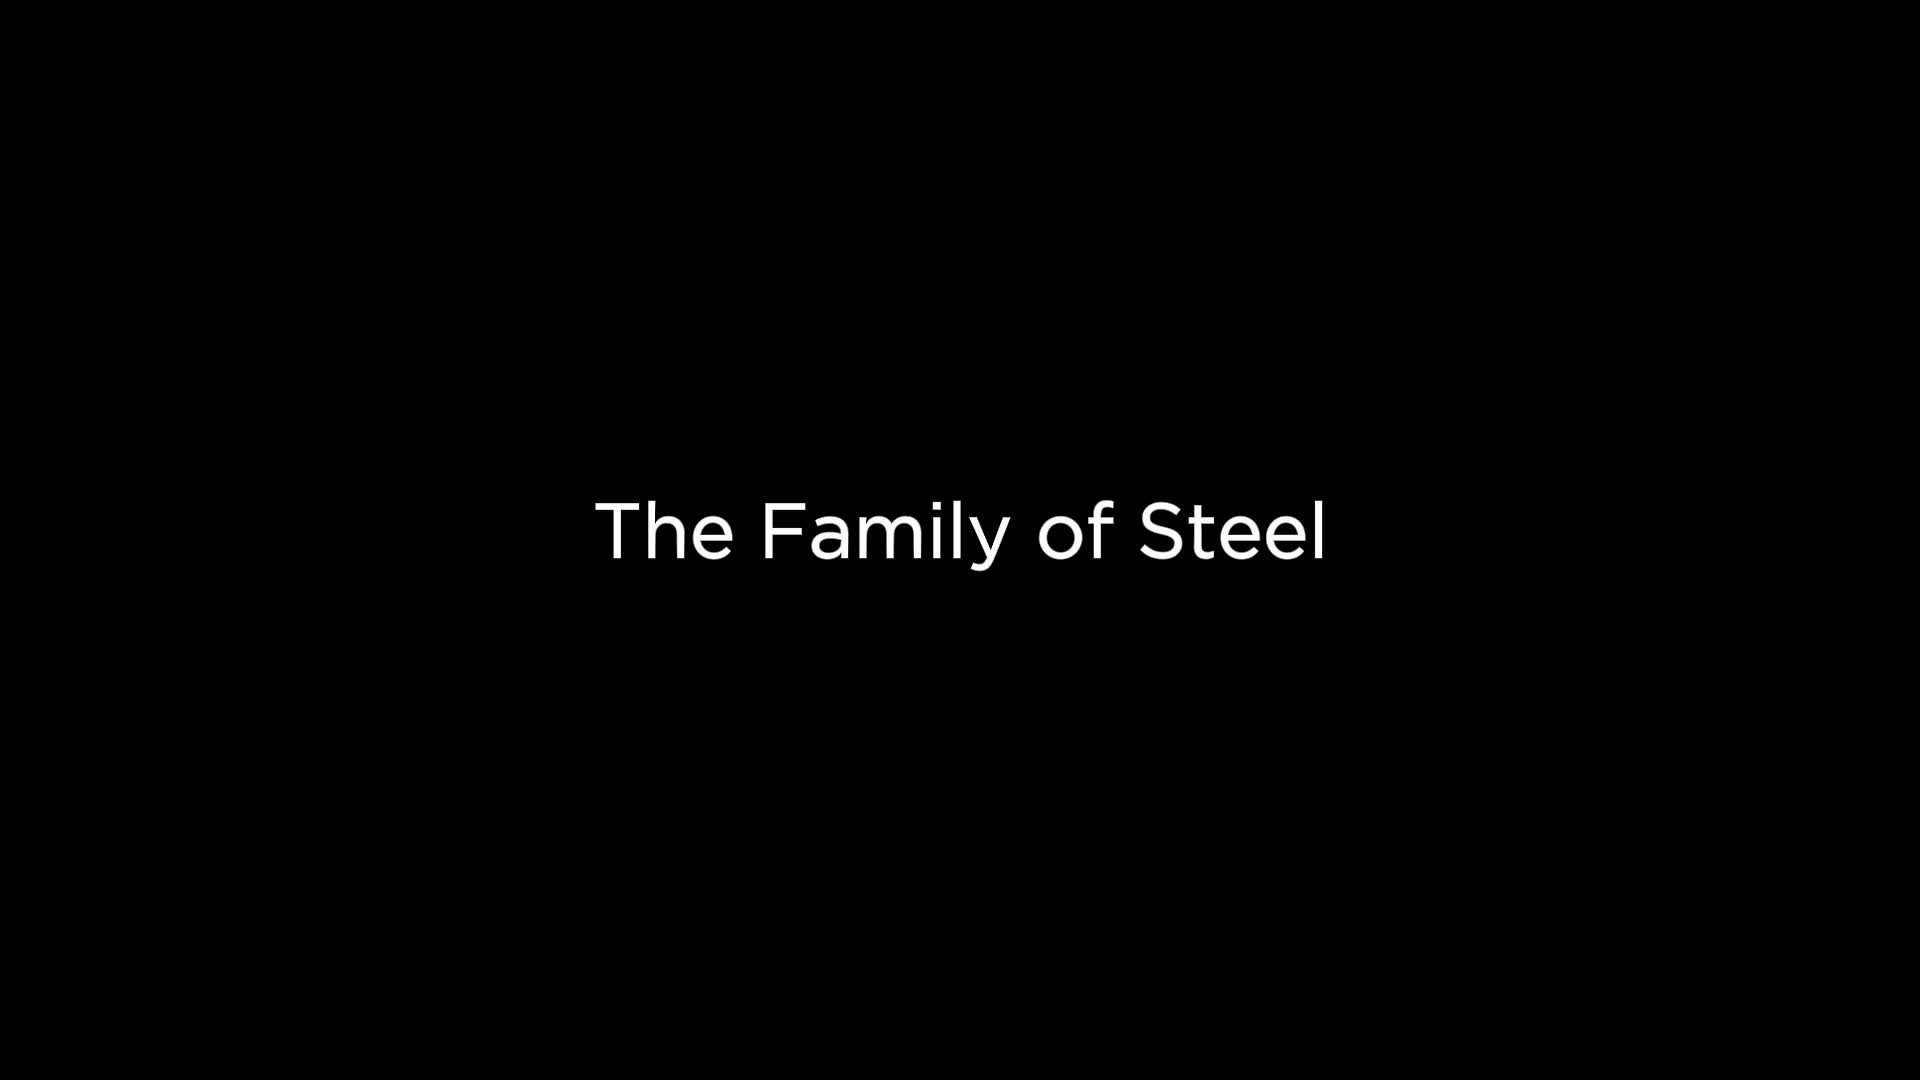 THE FAMILY OF STEEL